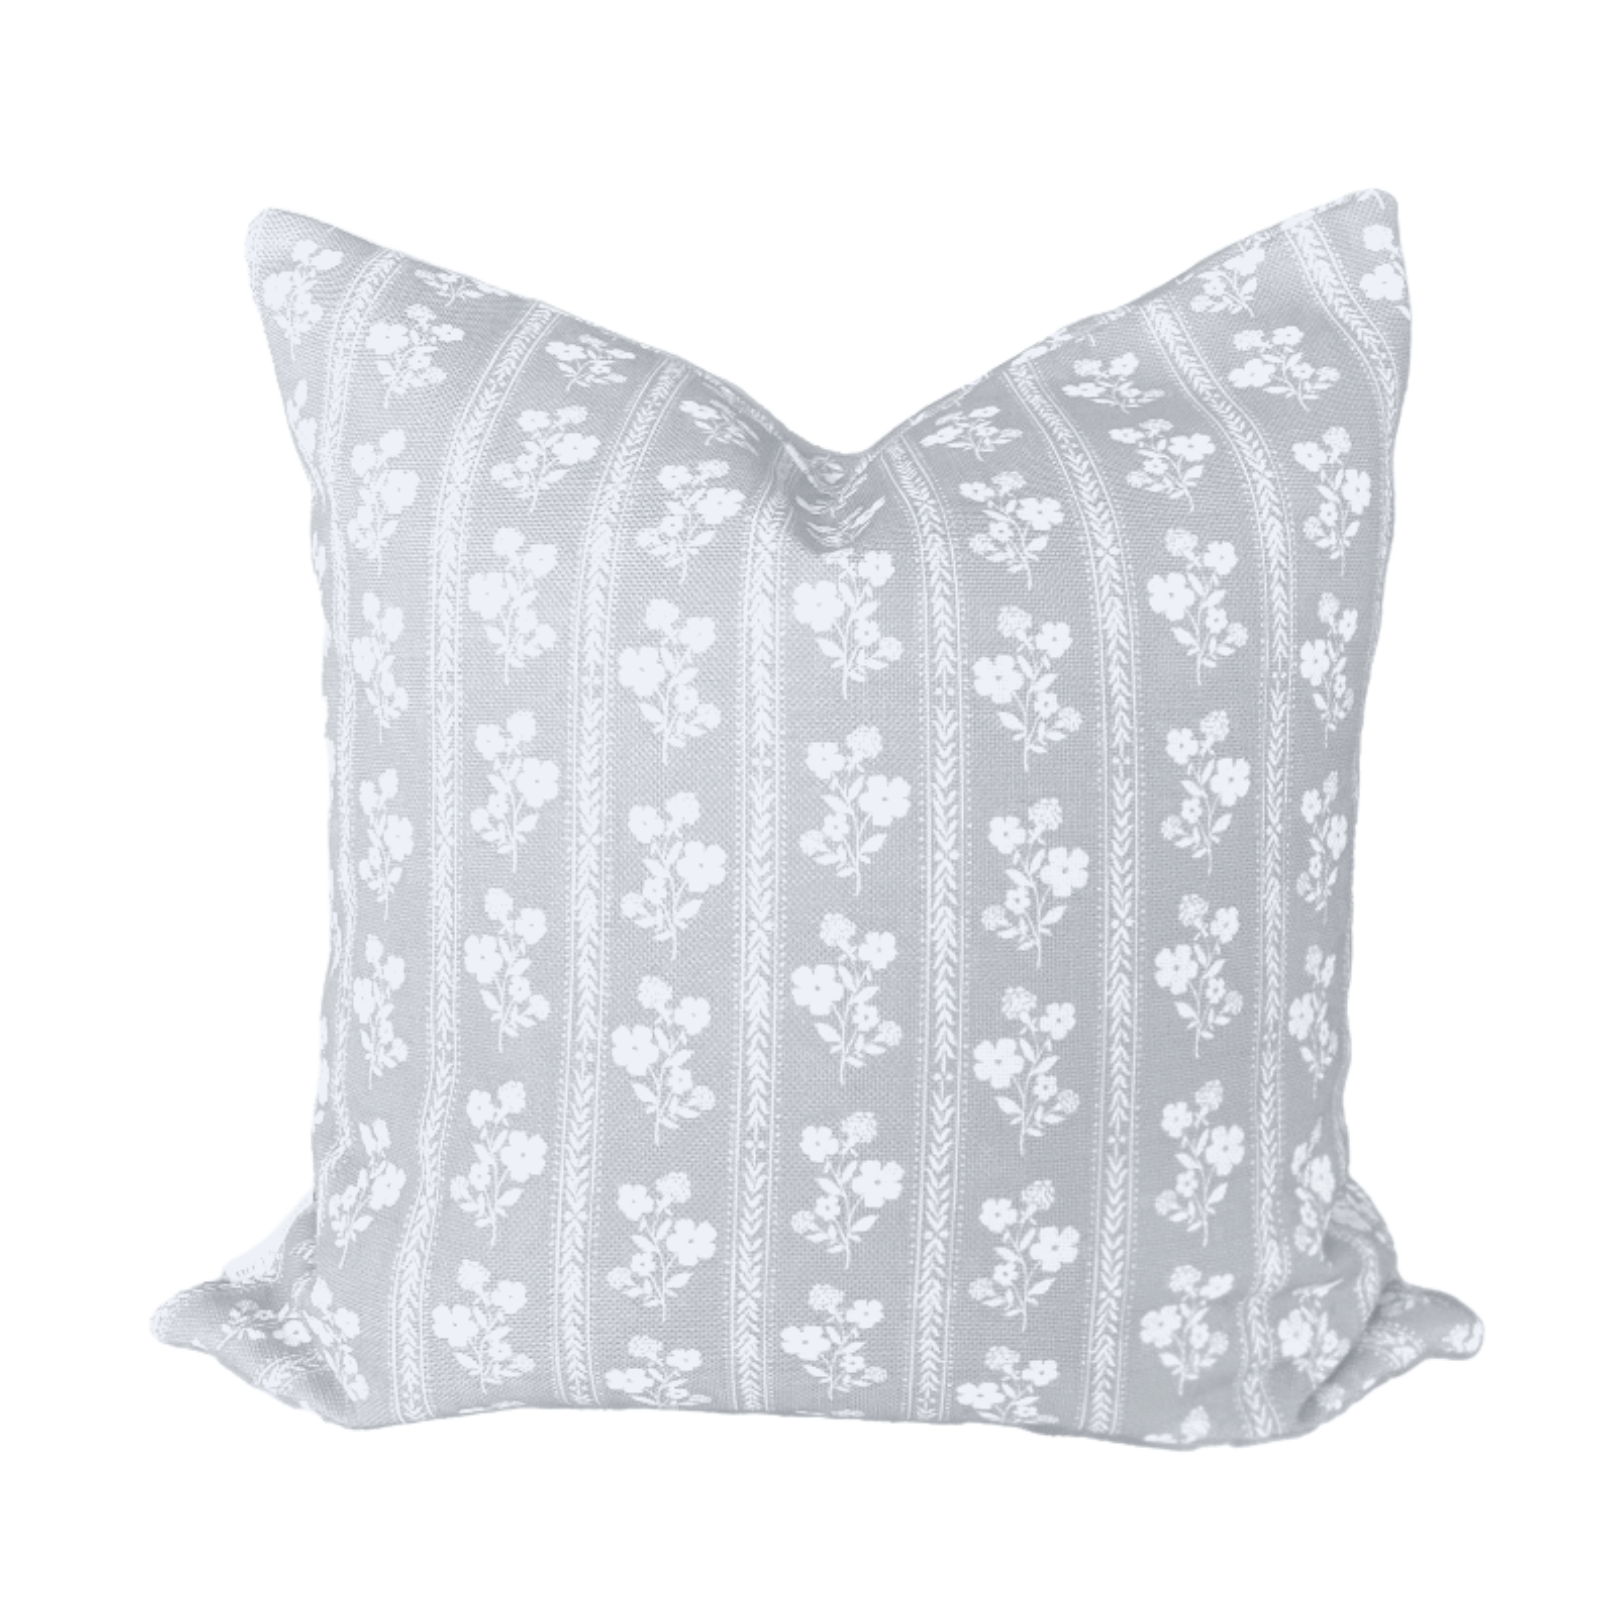 Hollyhock Floral Pillow in Stone Grey